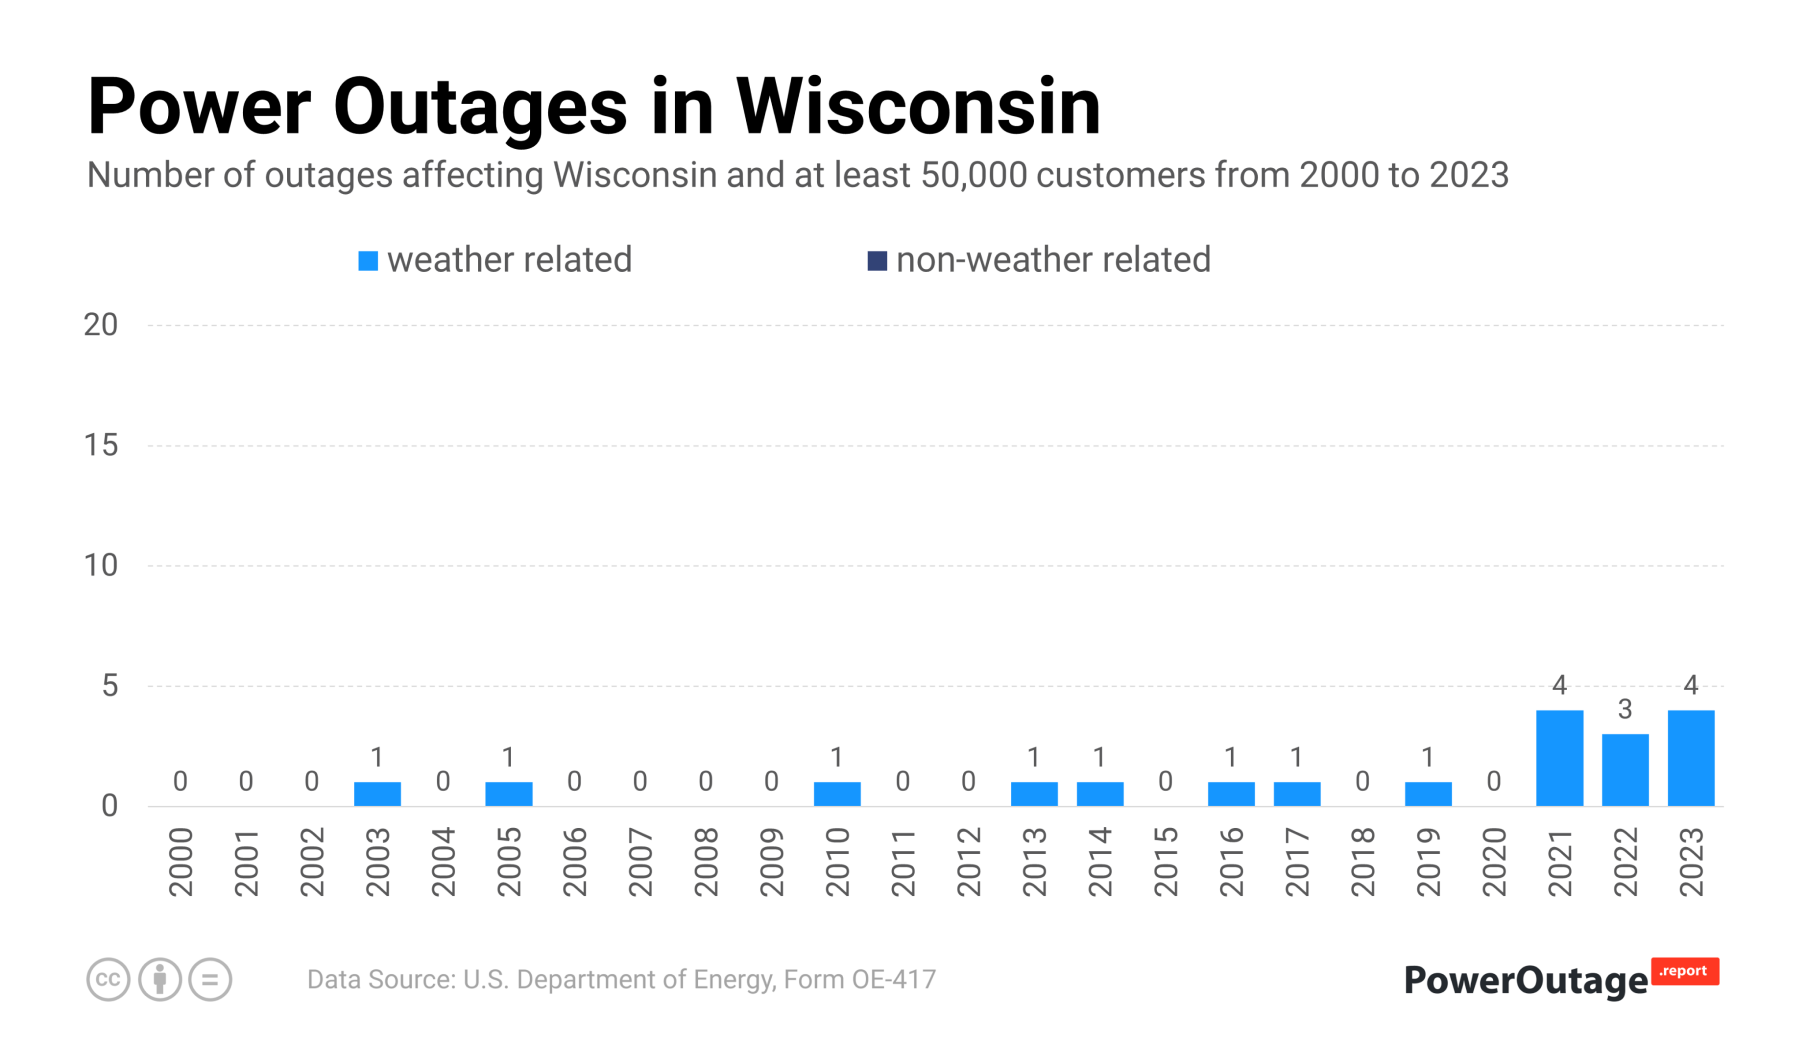 Wisconsin Power Outage Statistics (2000 - 2021)